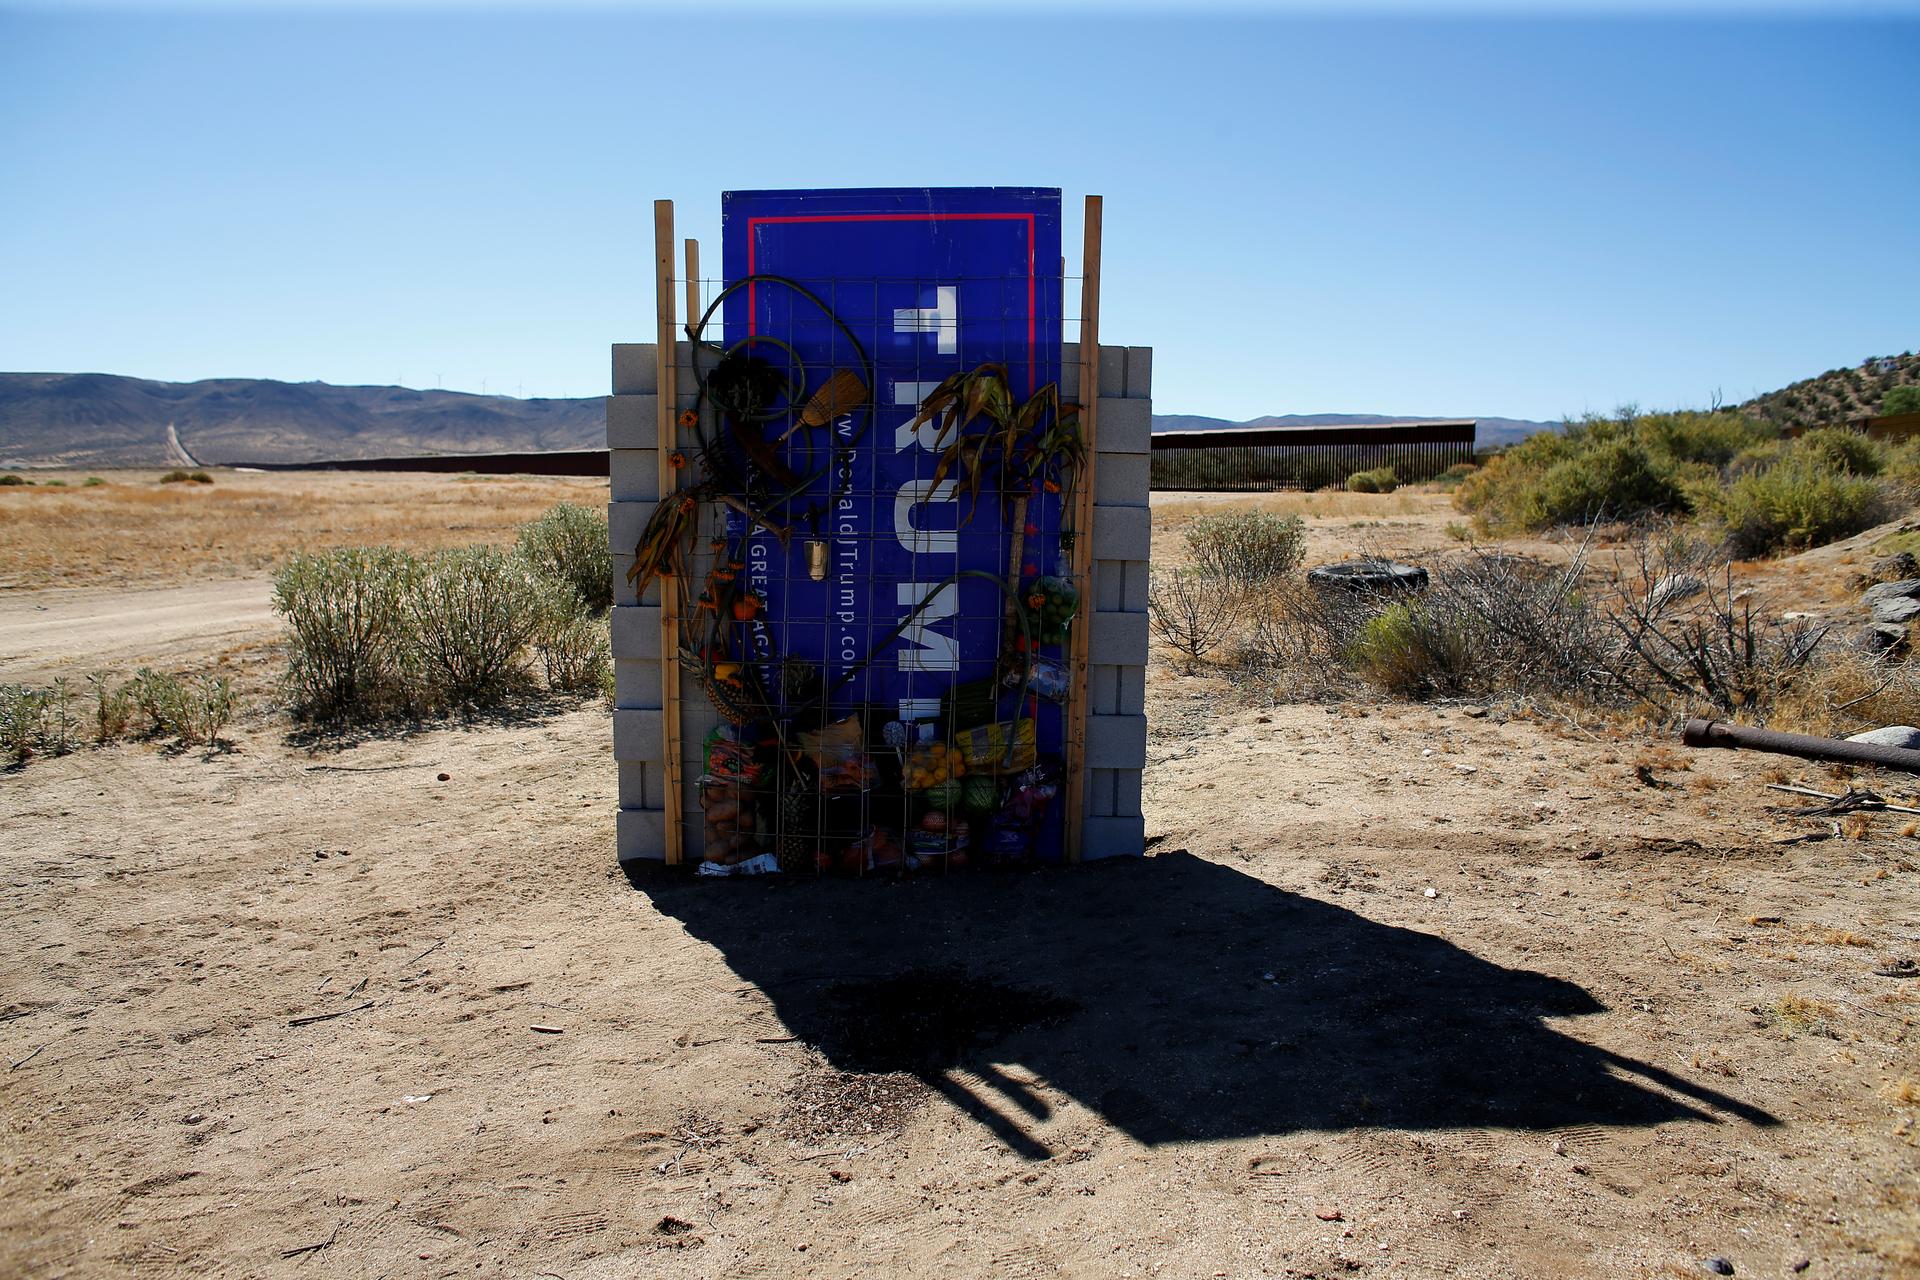 A version of Republican presidential candidate Donald Trump's wall created by artists David Gleeson and Mary Mihelic is pictured next to the U.S. Mexican border in Jacumba Hot Springs, California United States, July 12, 2016.